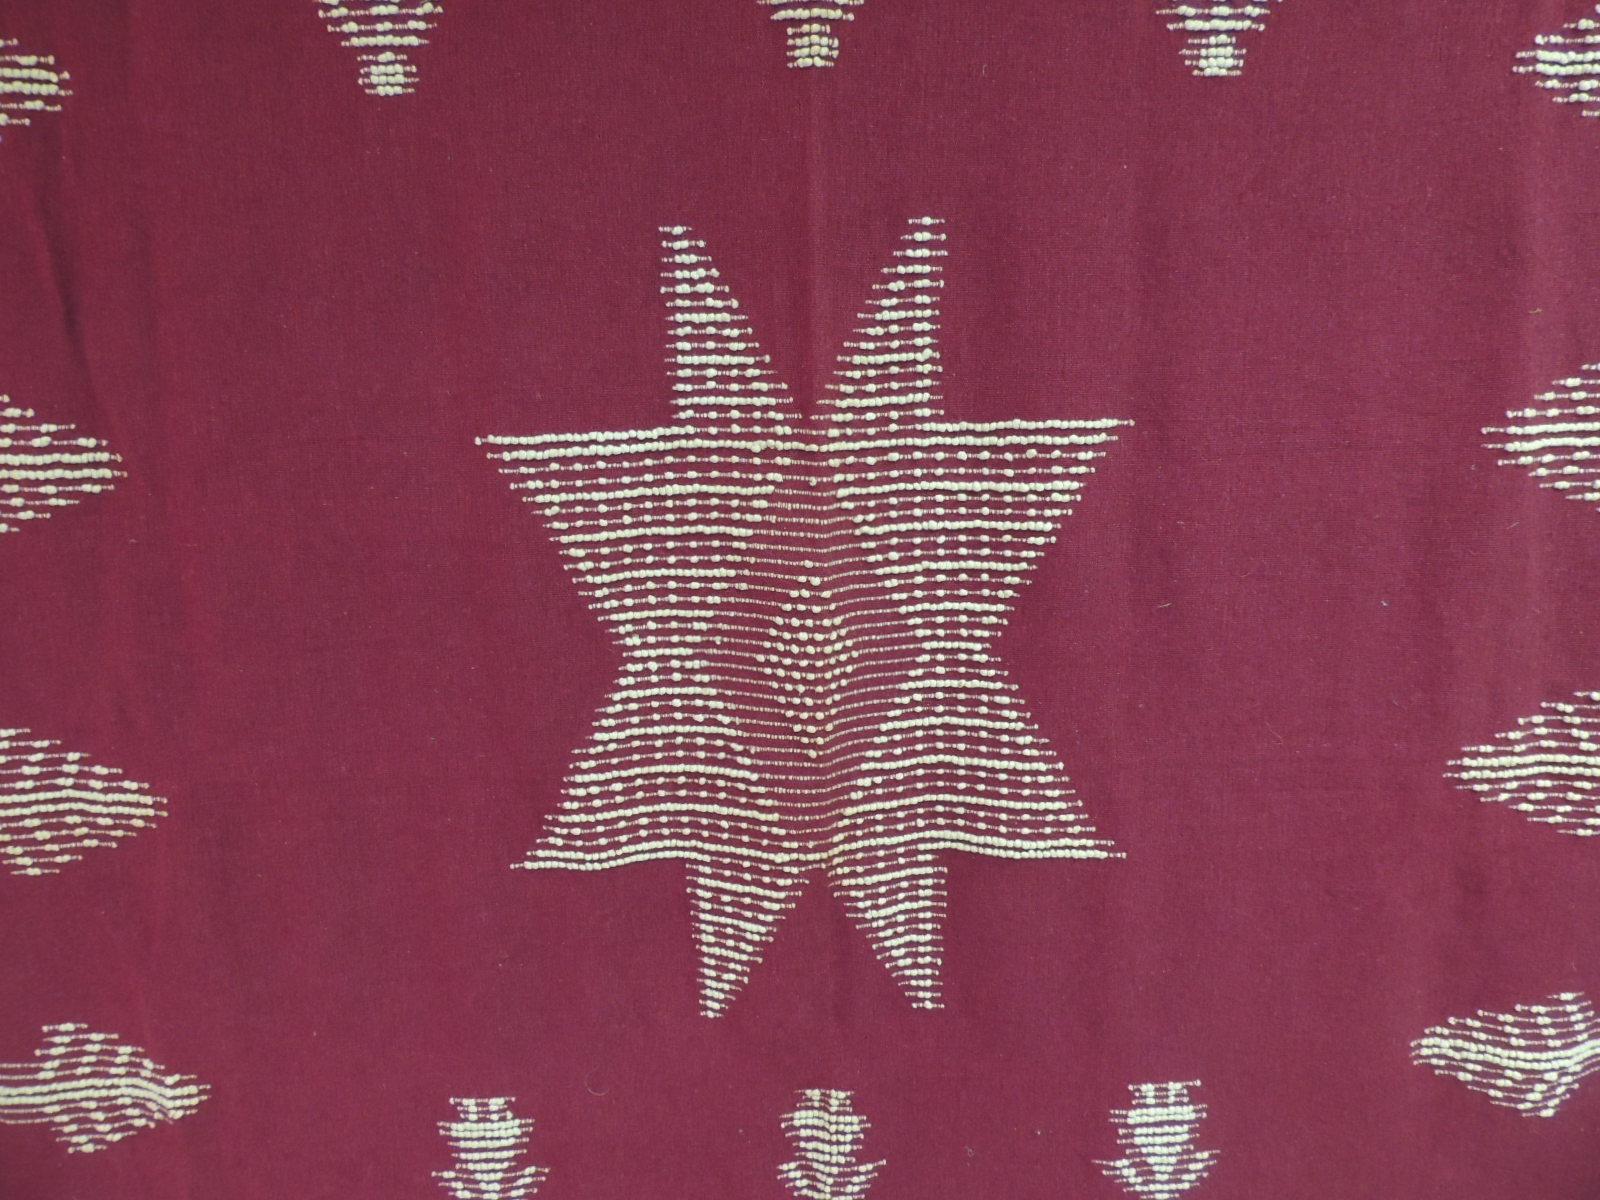 Large vintage Turkish red and natural wool handwoven blanket.
Handcrafted woven wool blanket (raised pattern) depicting human figures, trees and a large star in the center.
Excellent conditions.
Size: 80